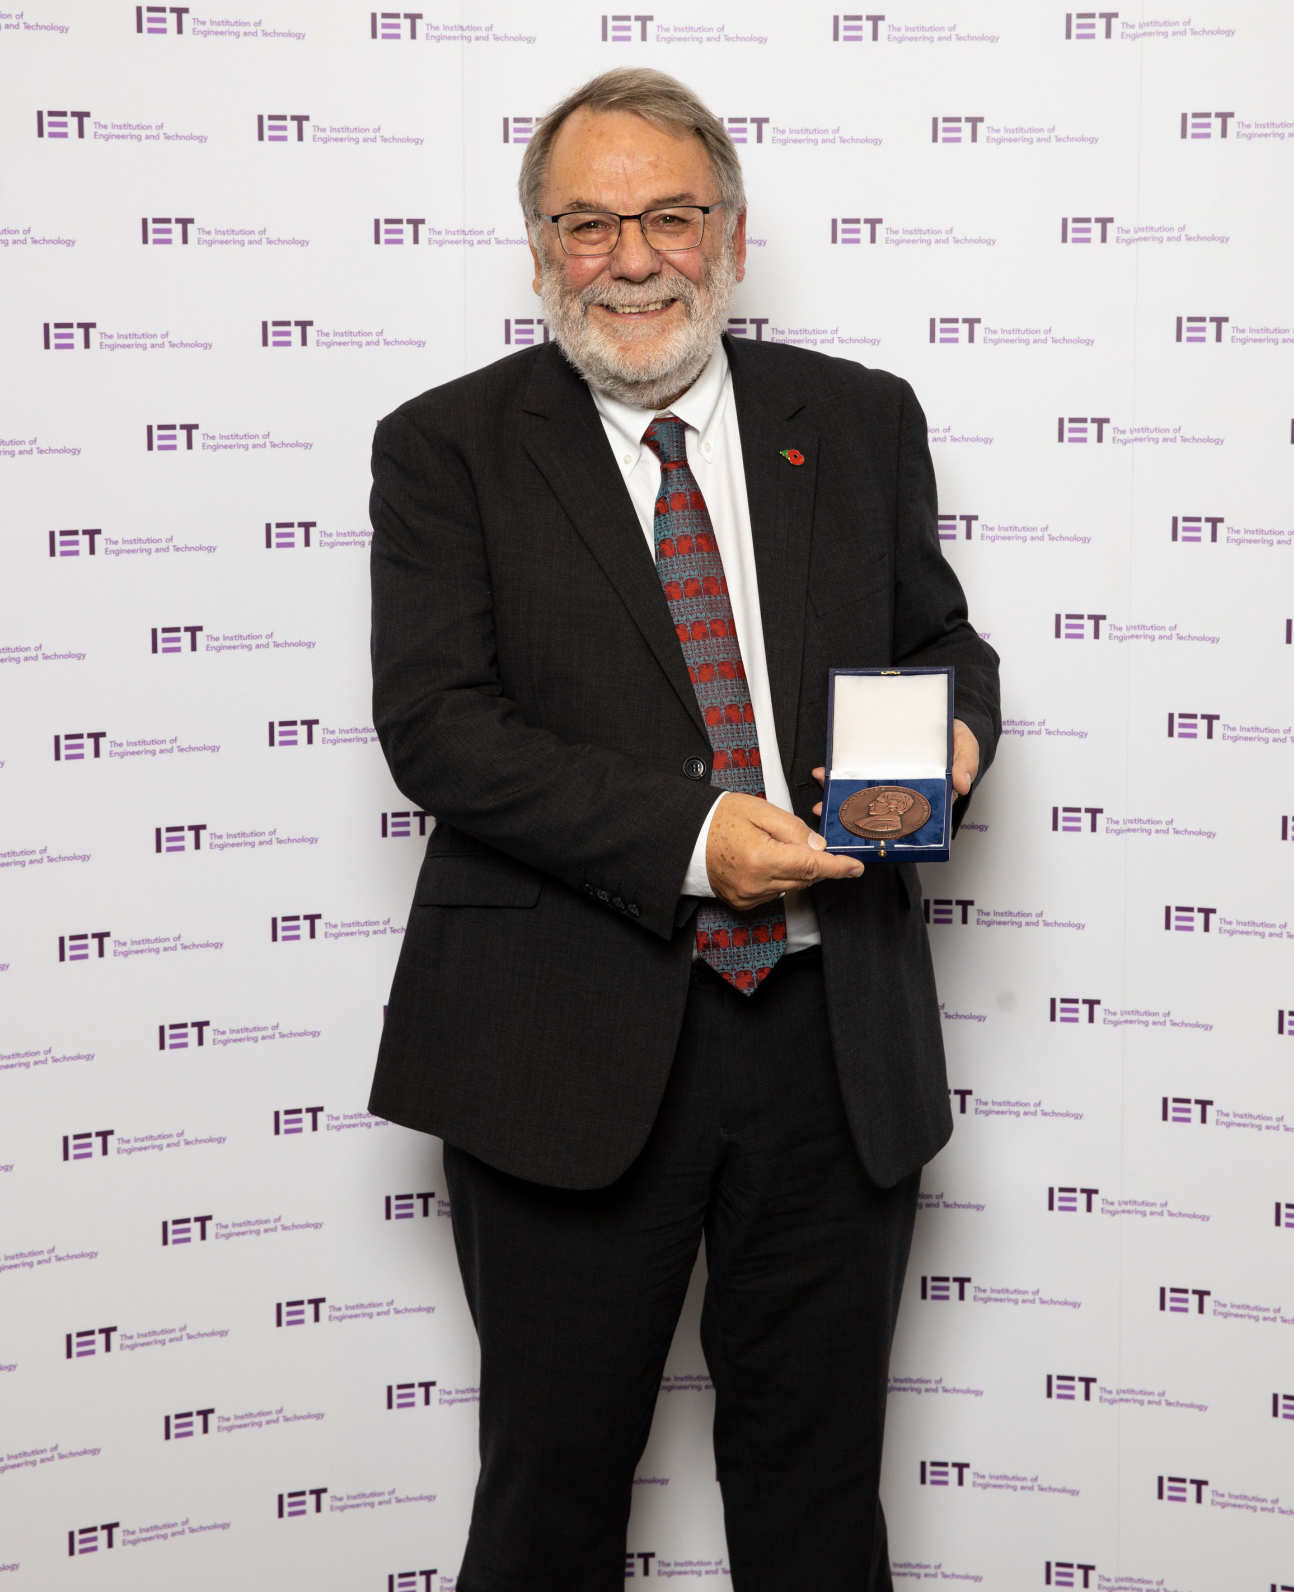 Peter Knight at IET awards